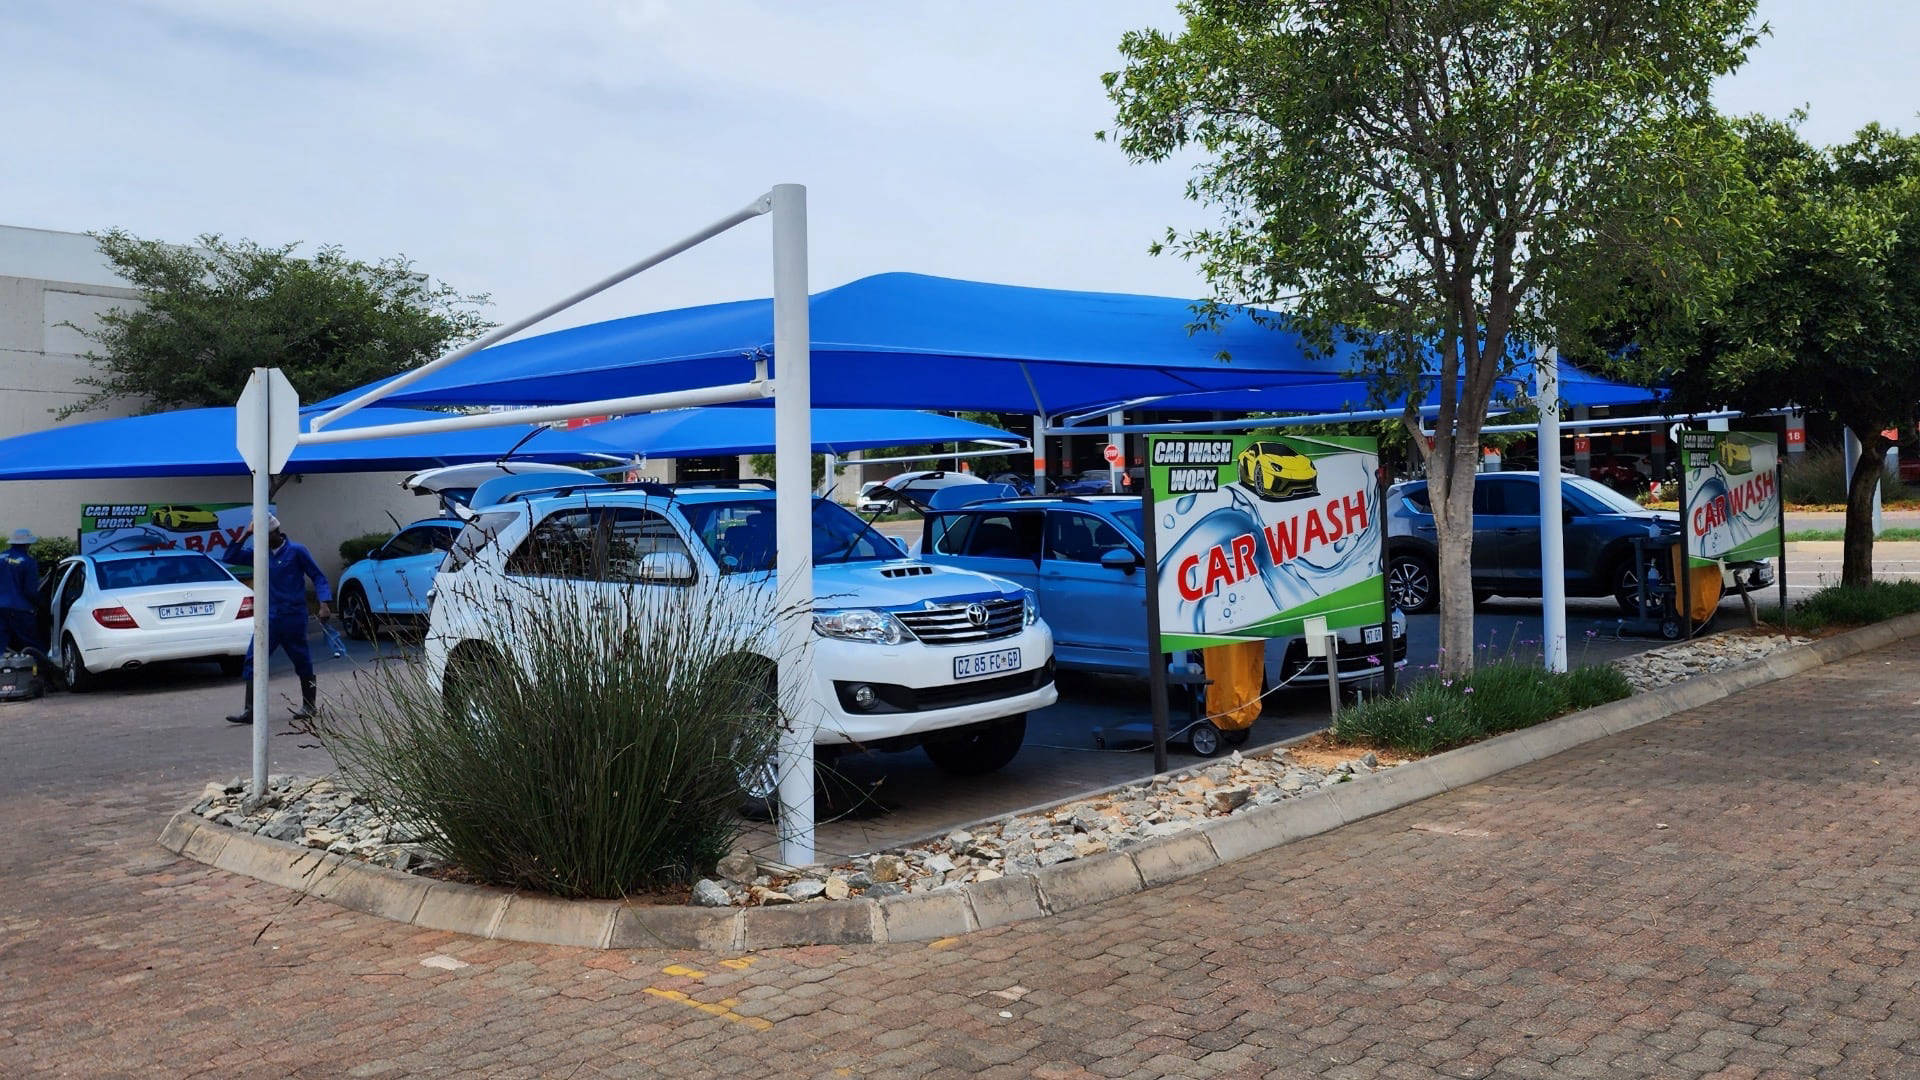 Randridge Mall CarWash Worx Branch, Car Wash Franchises Available, CarWash Worx Head Office, Join The Leading Car Wash Franchising Group, Start Your Own Successful Car Wash Business Now